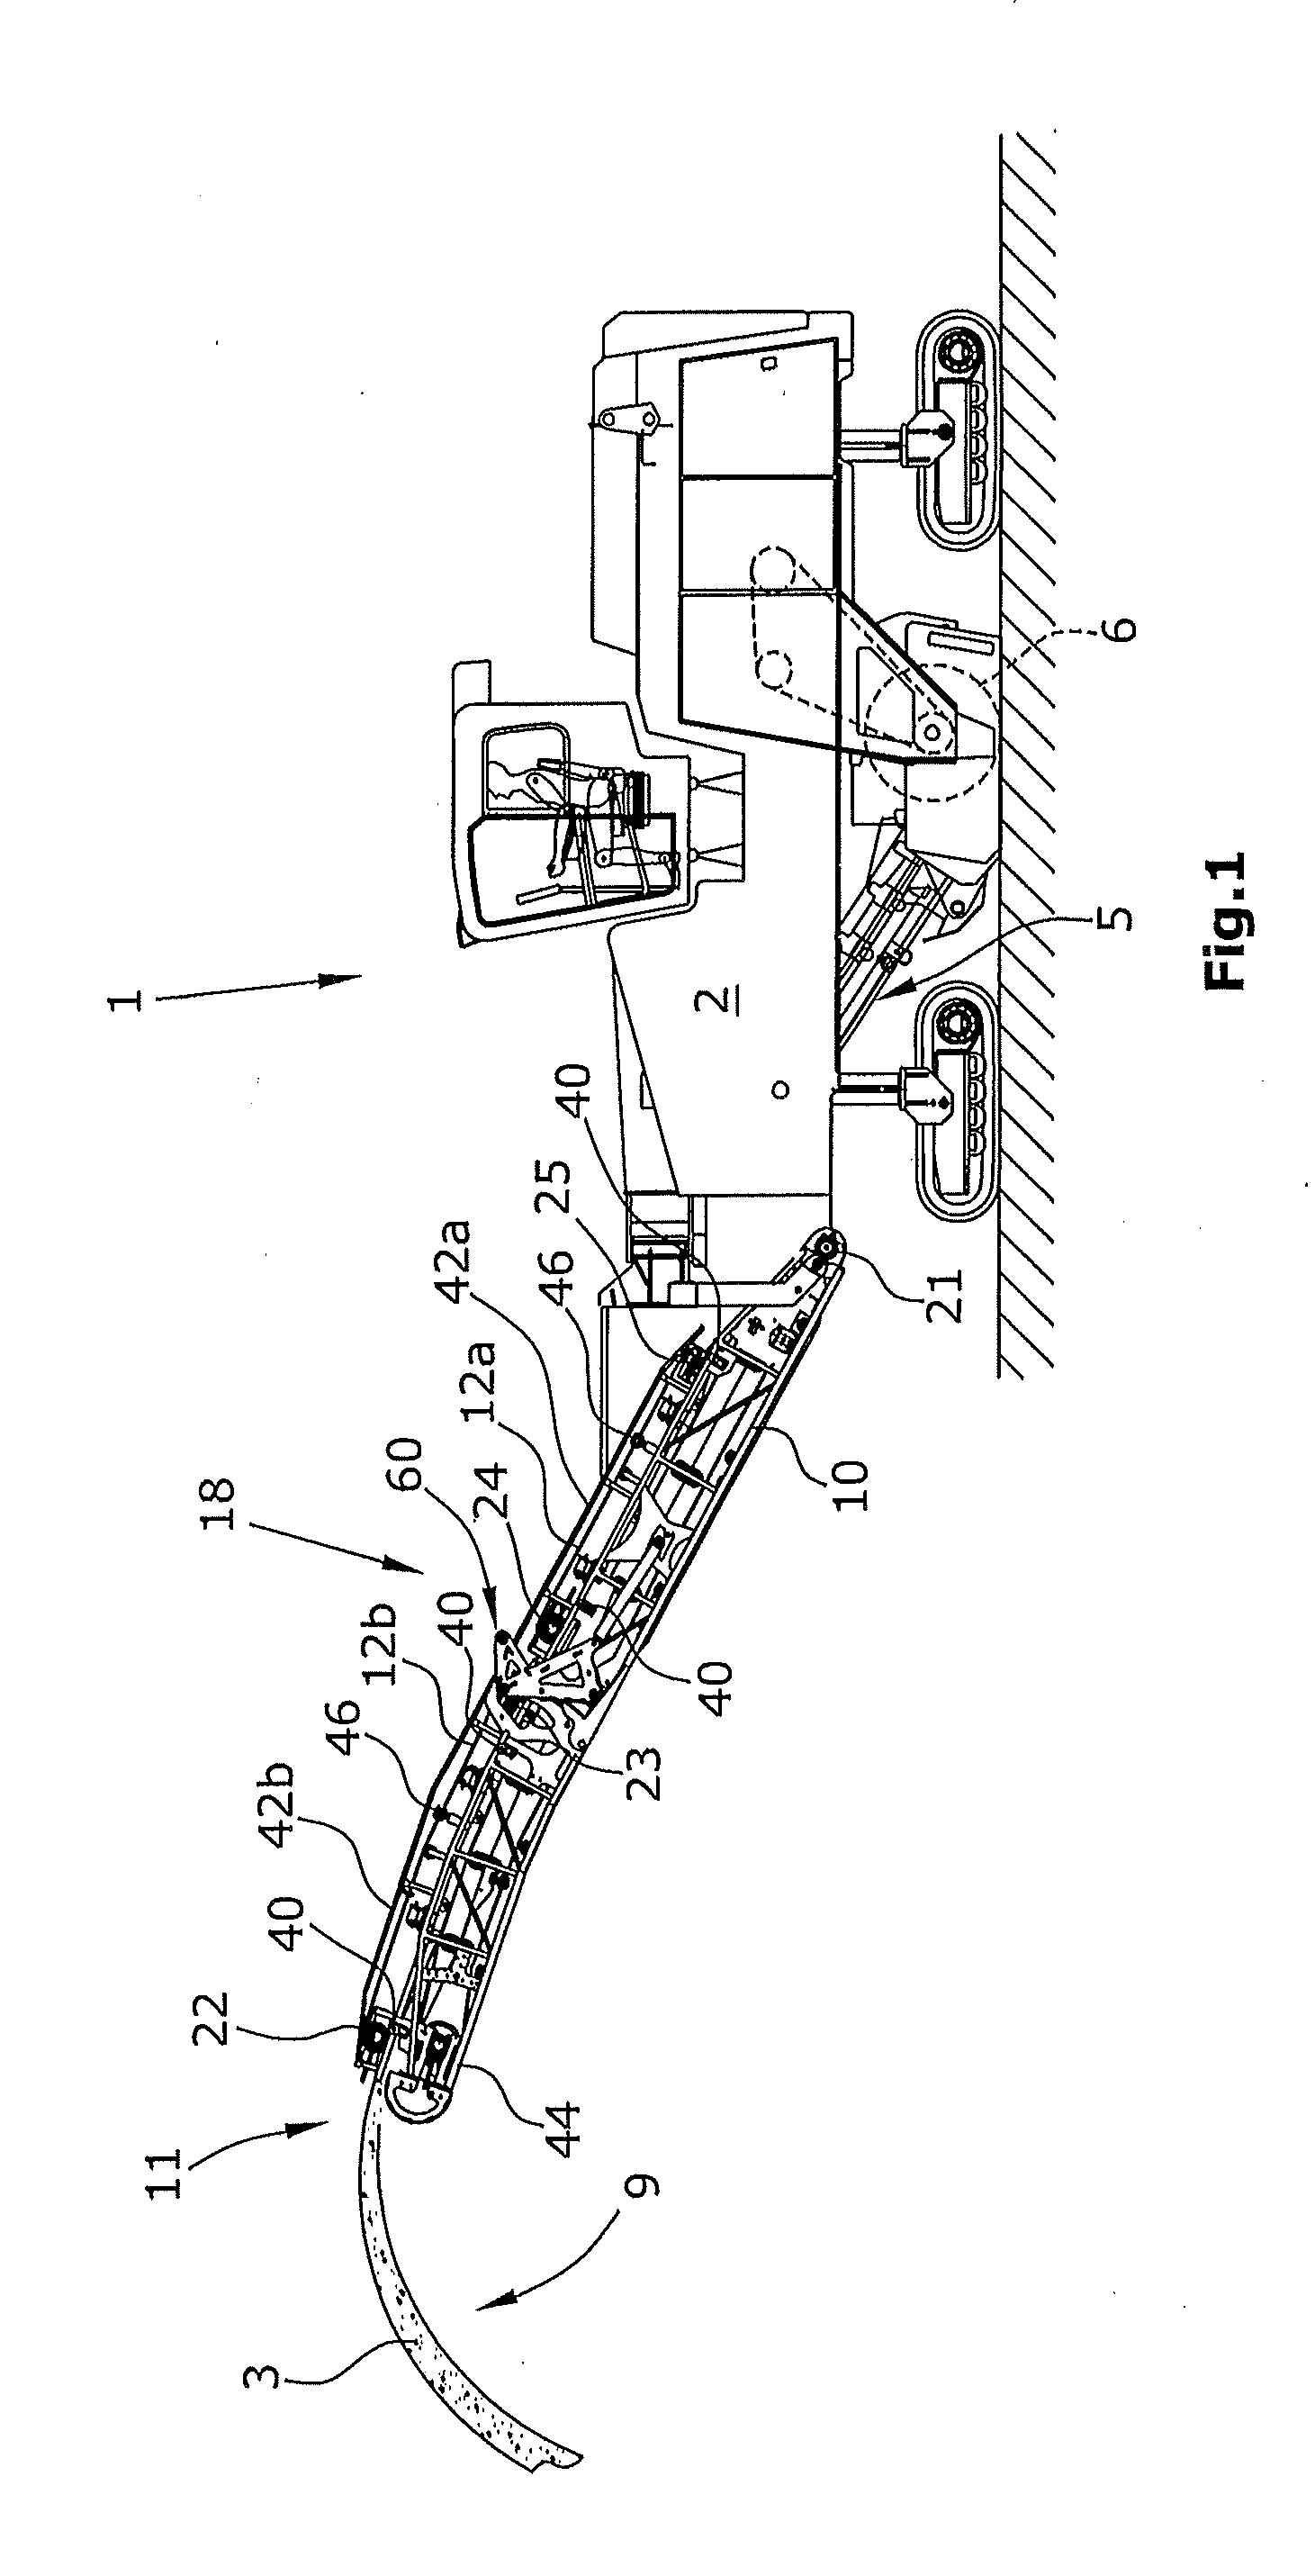 Construction Machine, As Well As Method For Milling Off And Transporting Away A Milled-Off Stream Of Material Of A Construction Machine